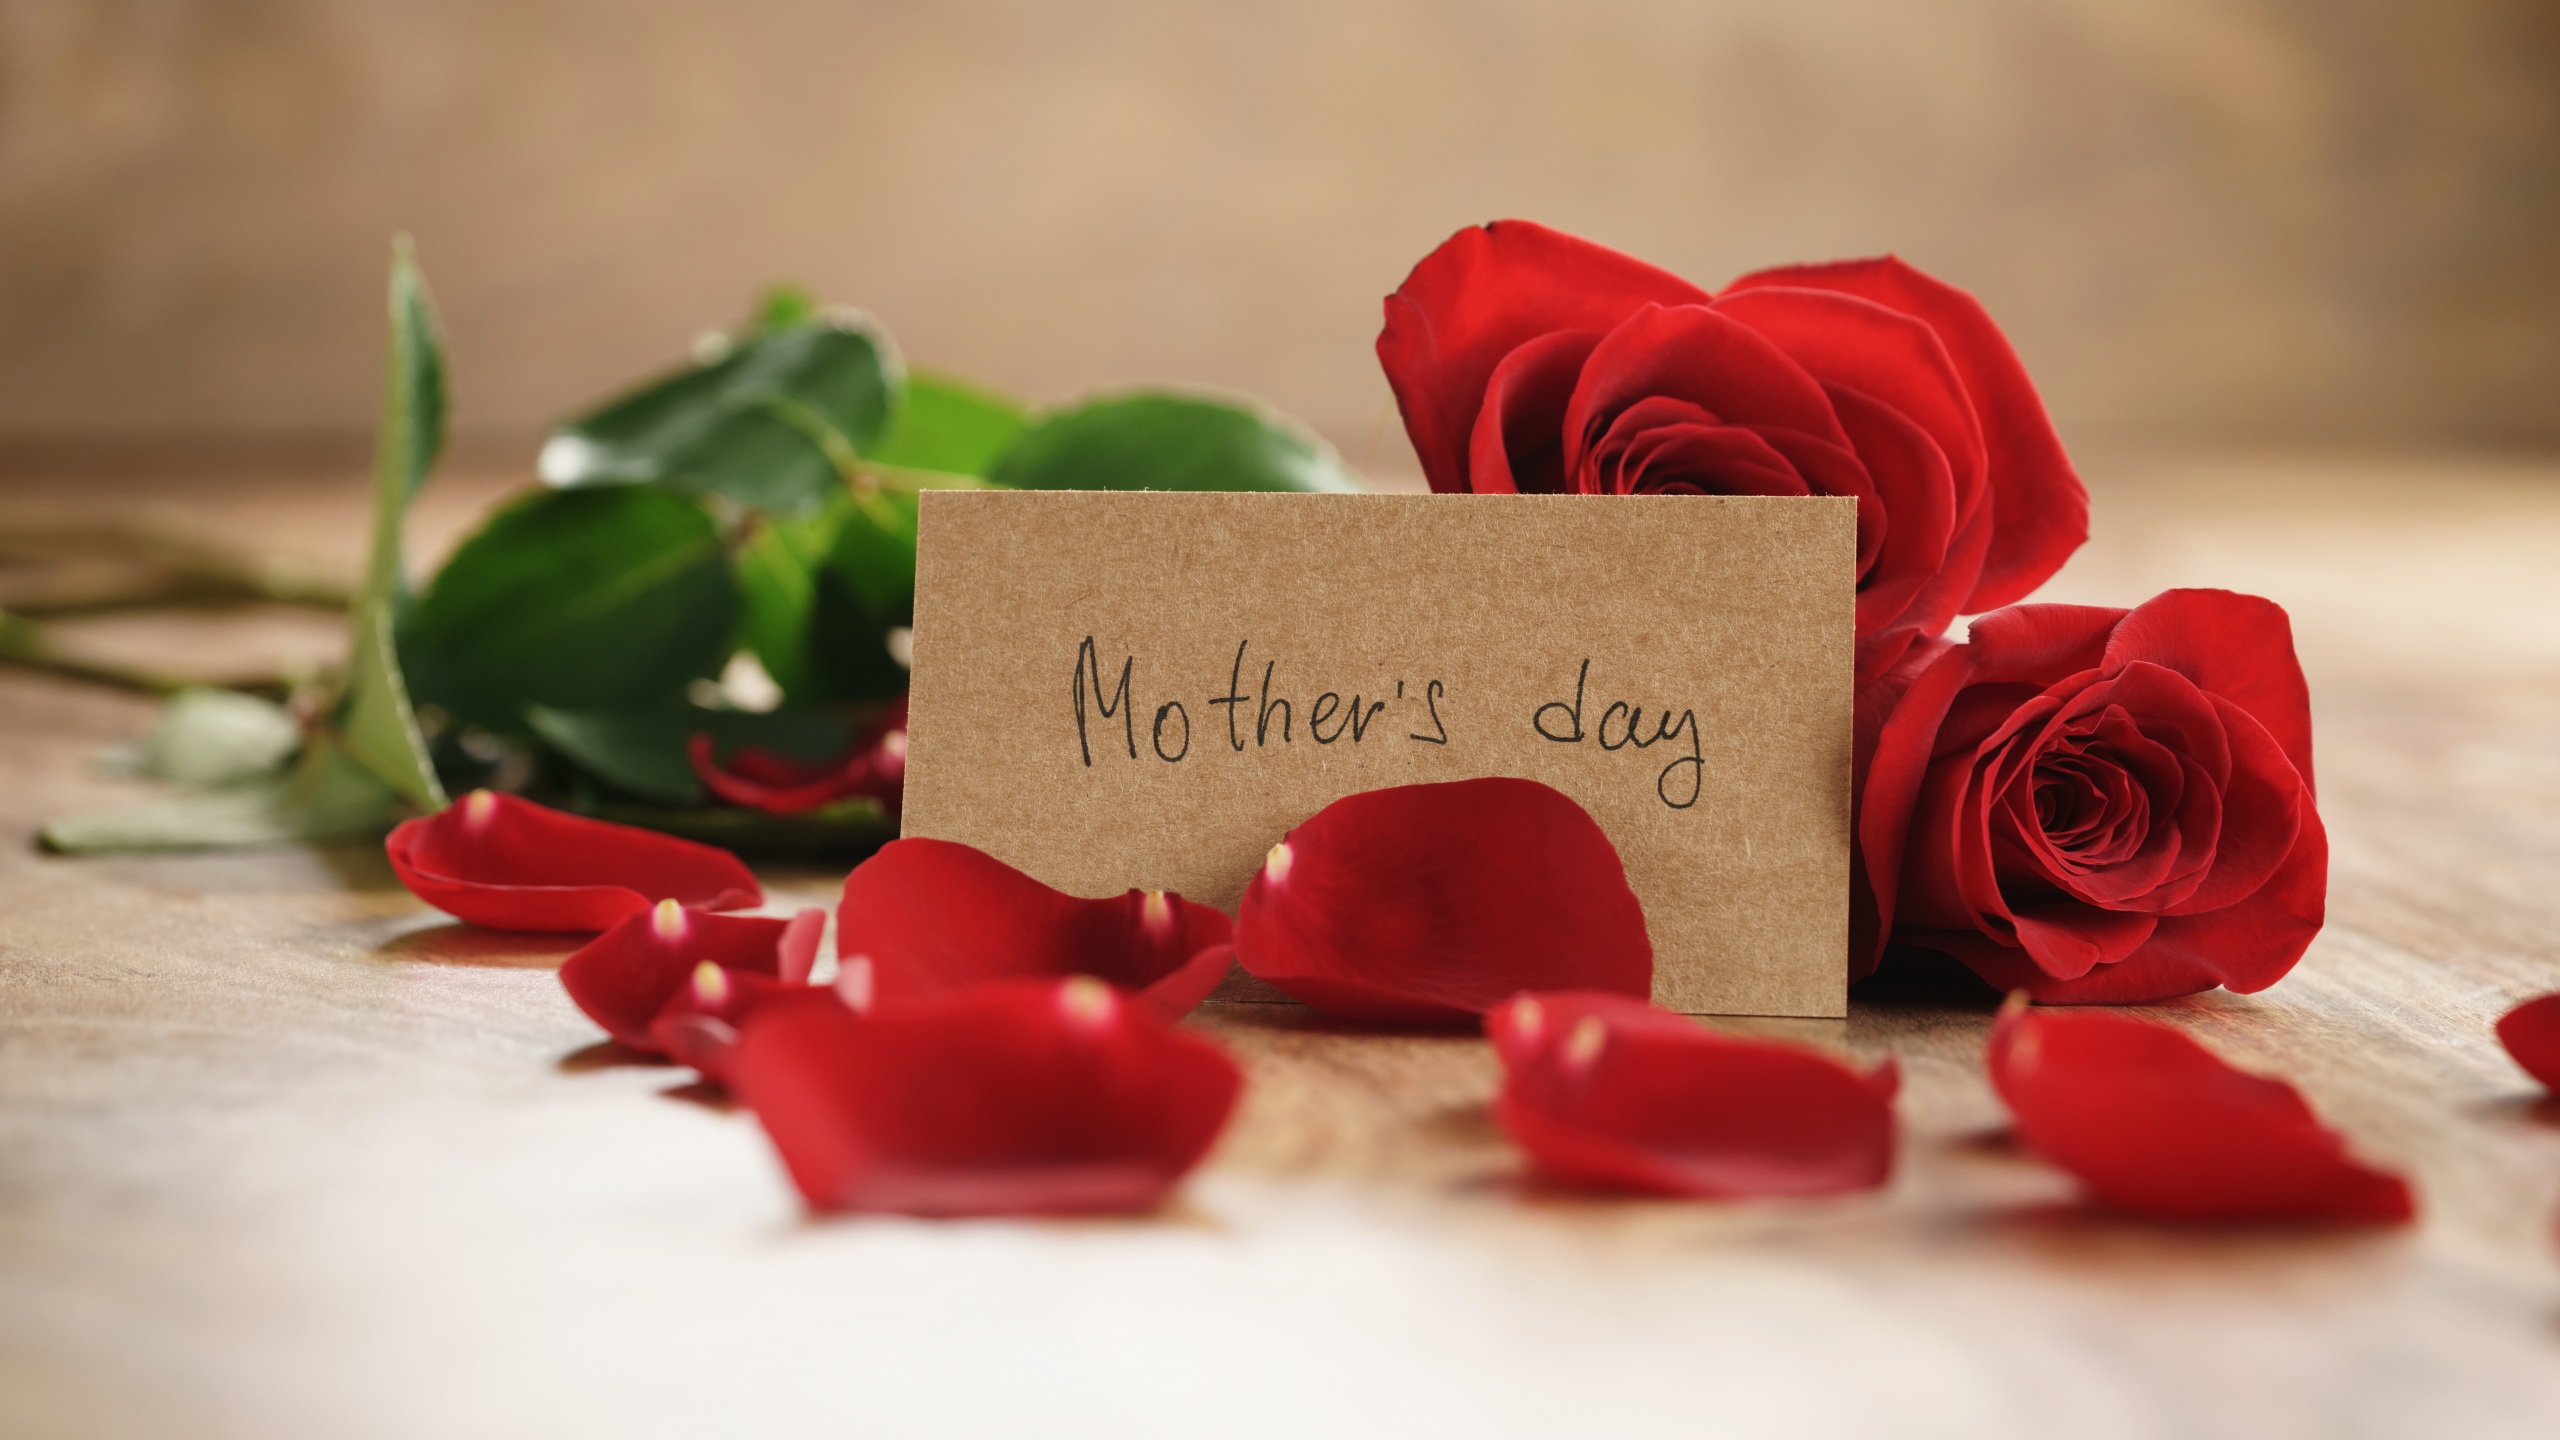 Happy Mothers Day Red Rose - HD Wallpaper 